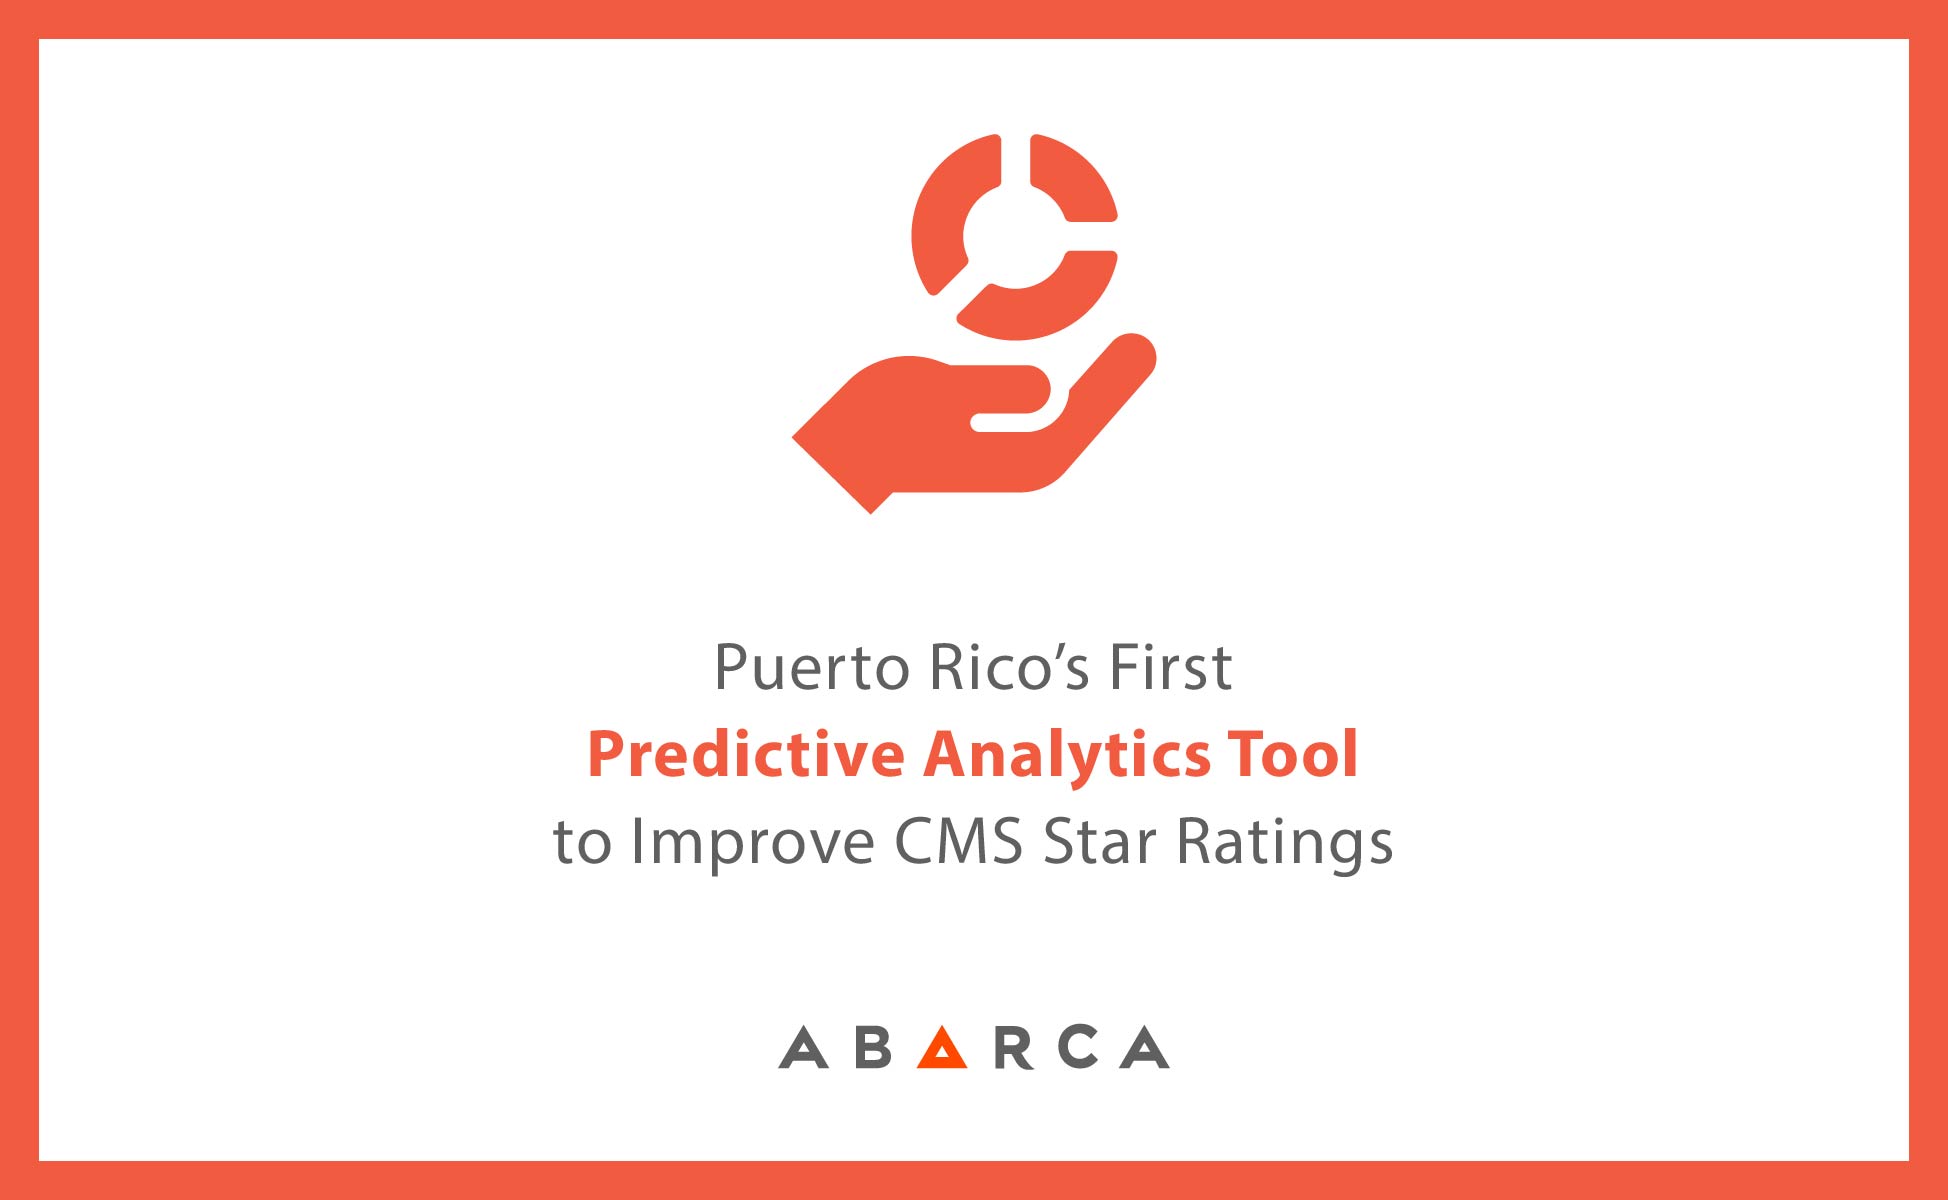 Abarca announces the release of RxTarget, Puerto Rico’s first predictive analytics tool to improve CMS Star Ratings for medication adherence & high-risk medications (HRM)